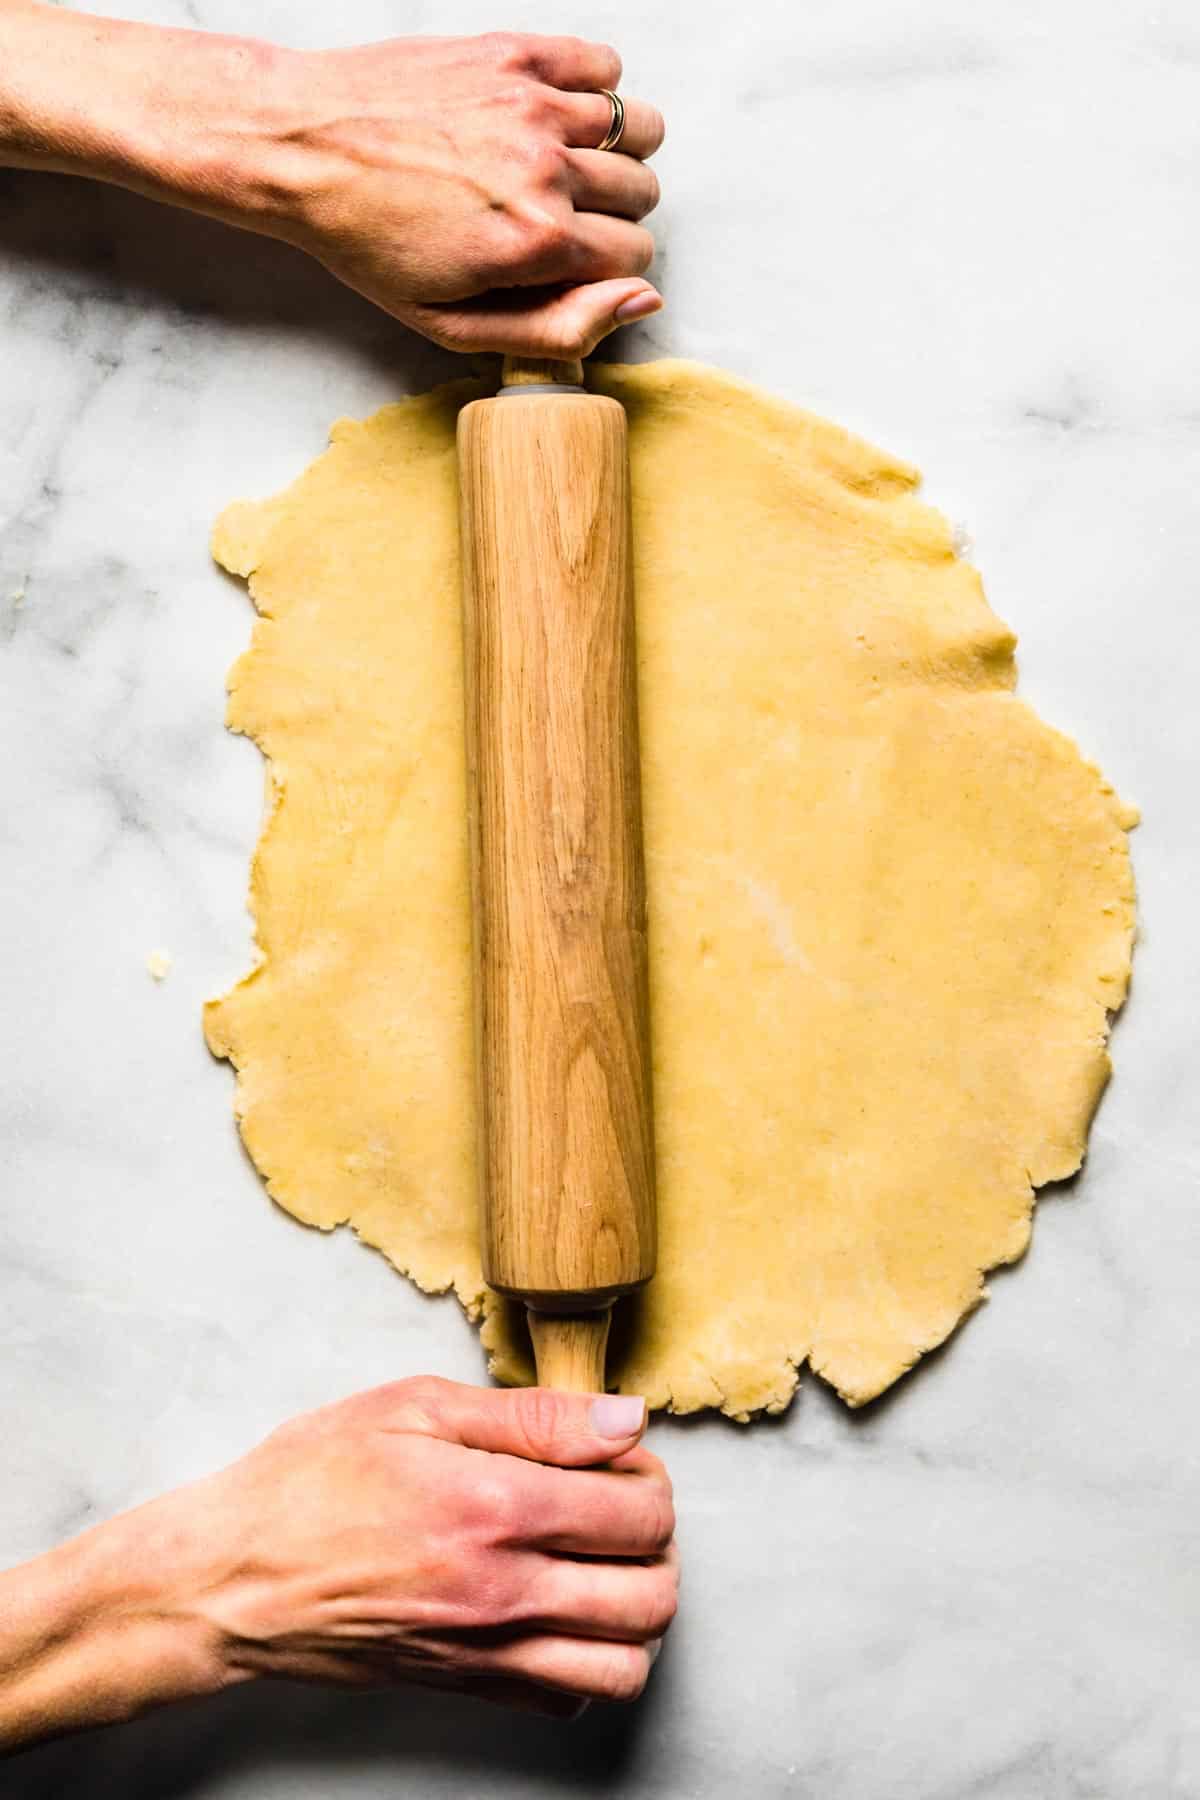 A woman's hands using a wooden rolling pin to roll out a pie crust.